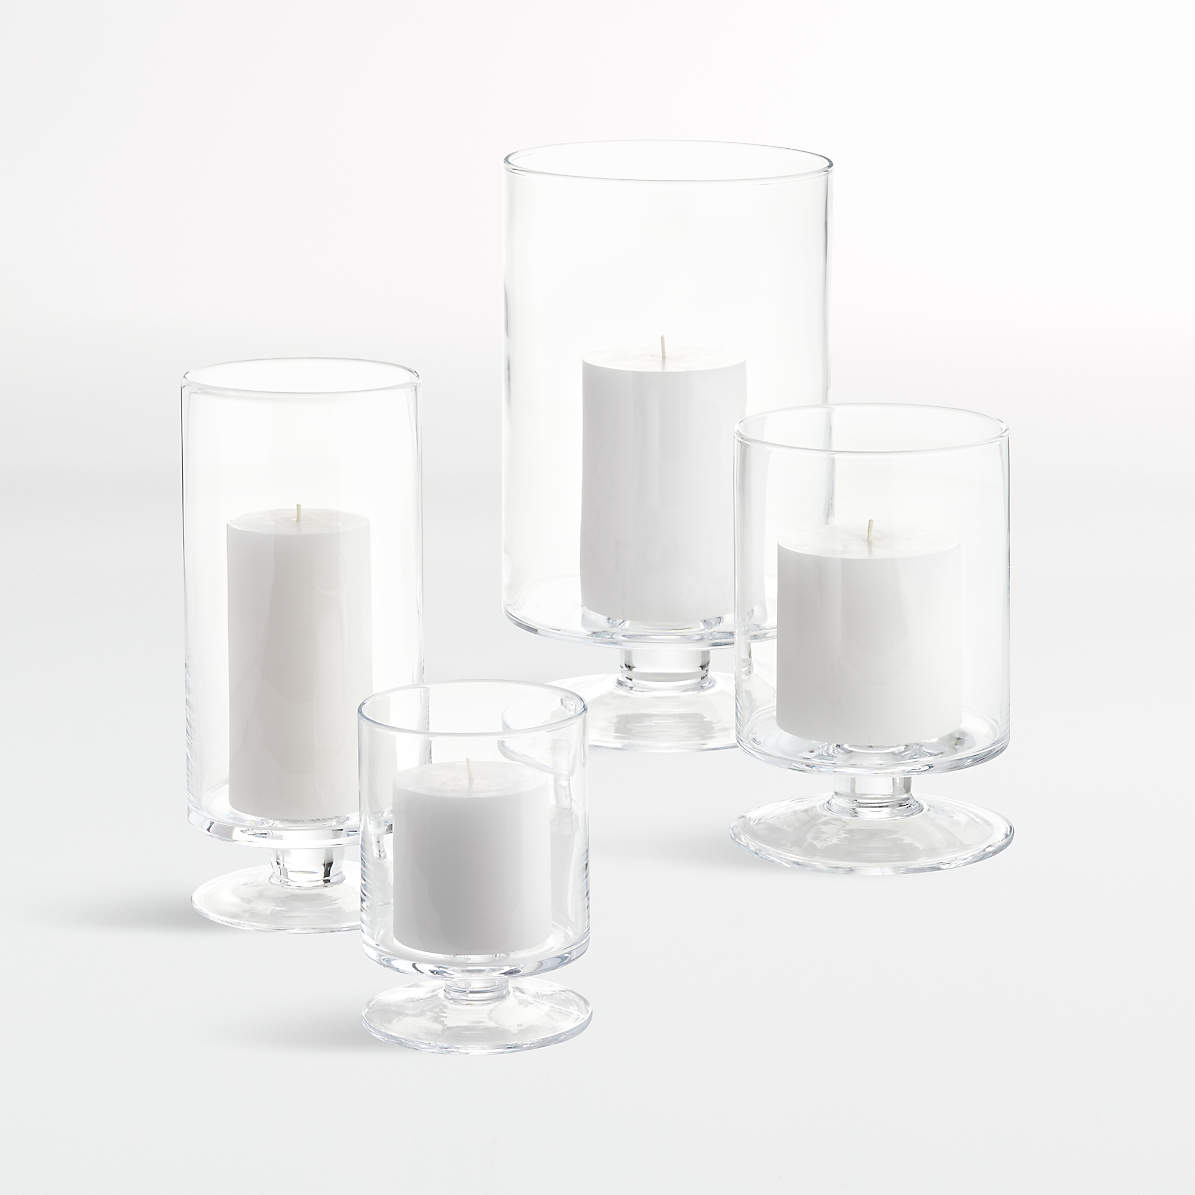 London Glass Hurricane Candle Holders Crate And Barrel